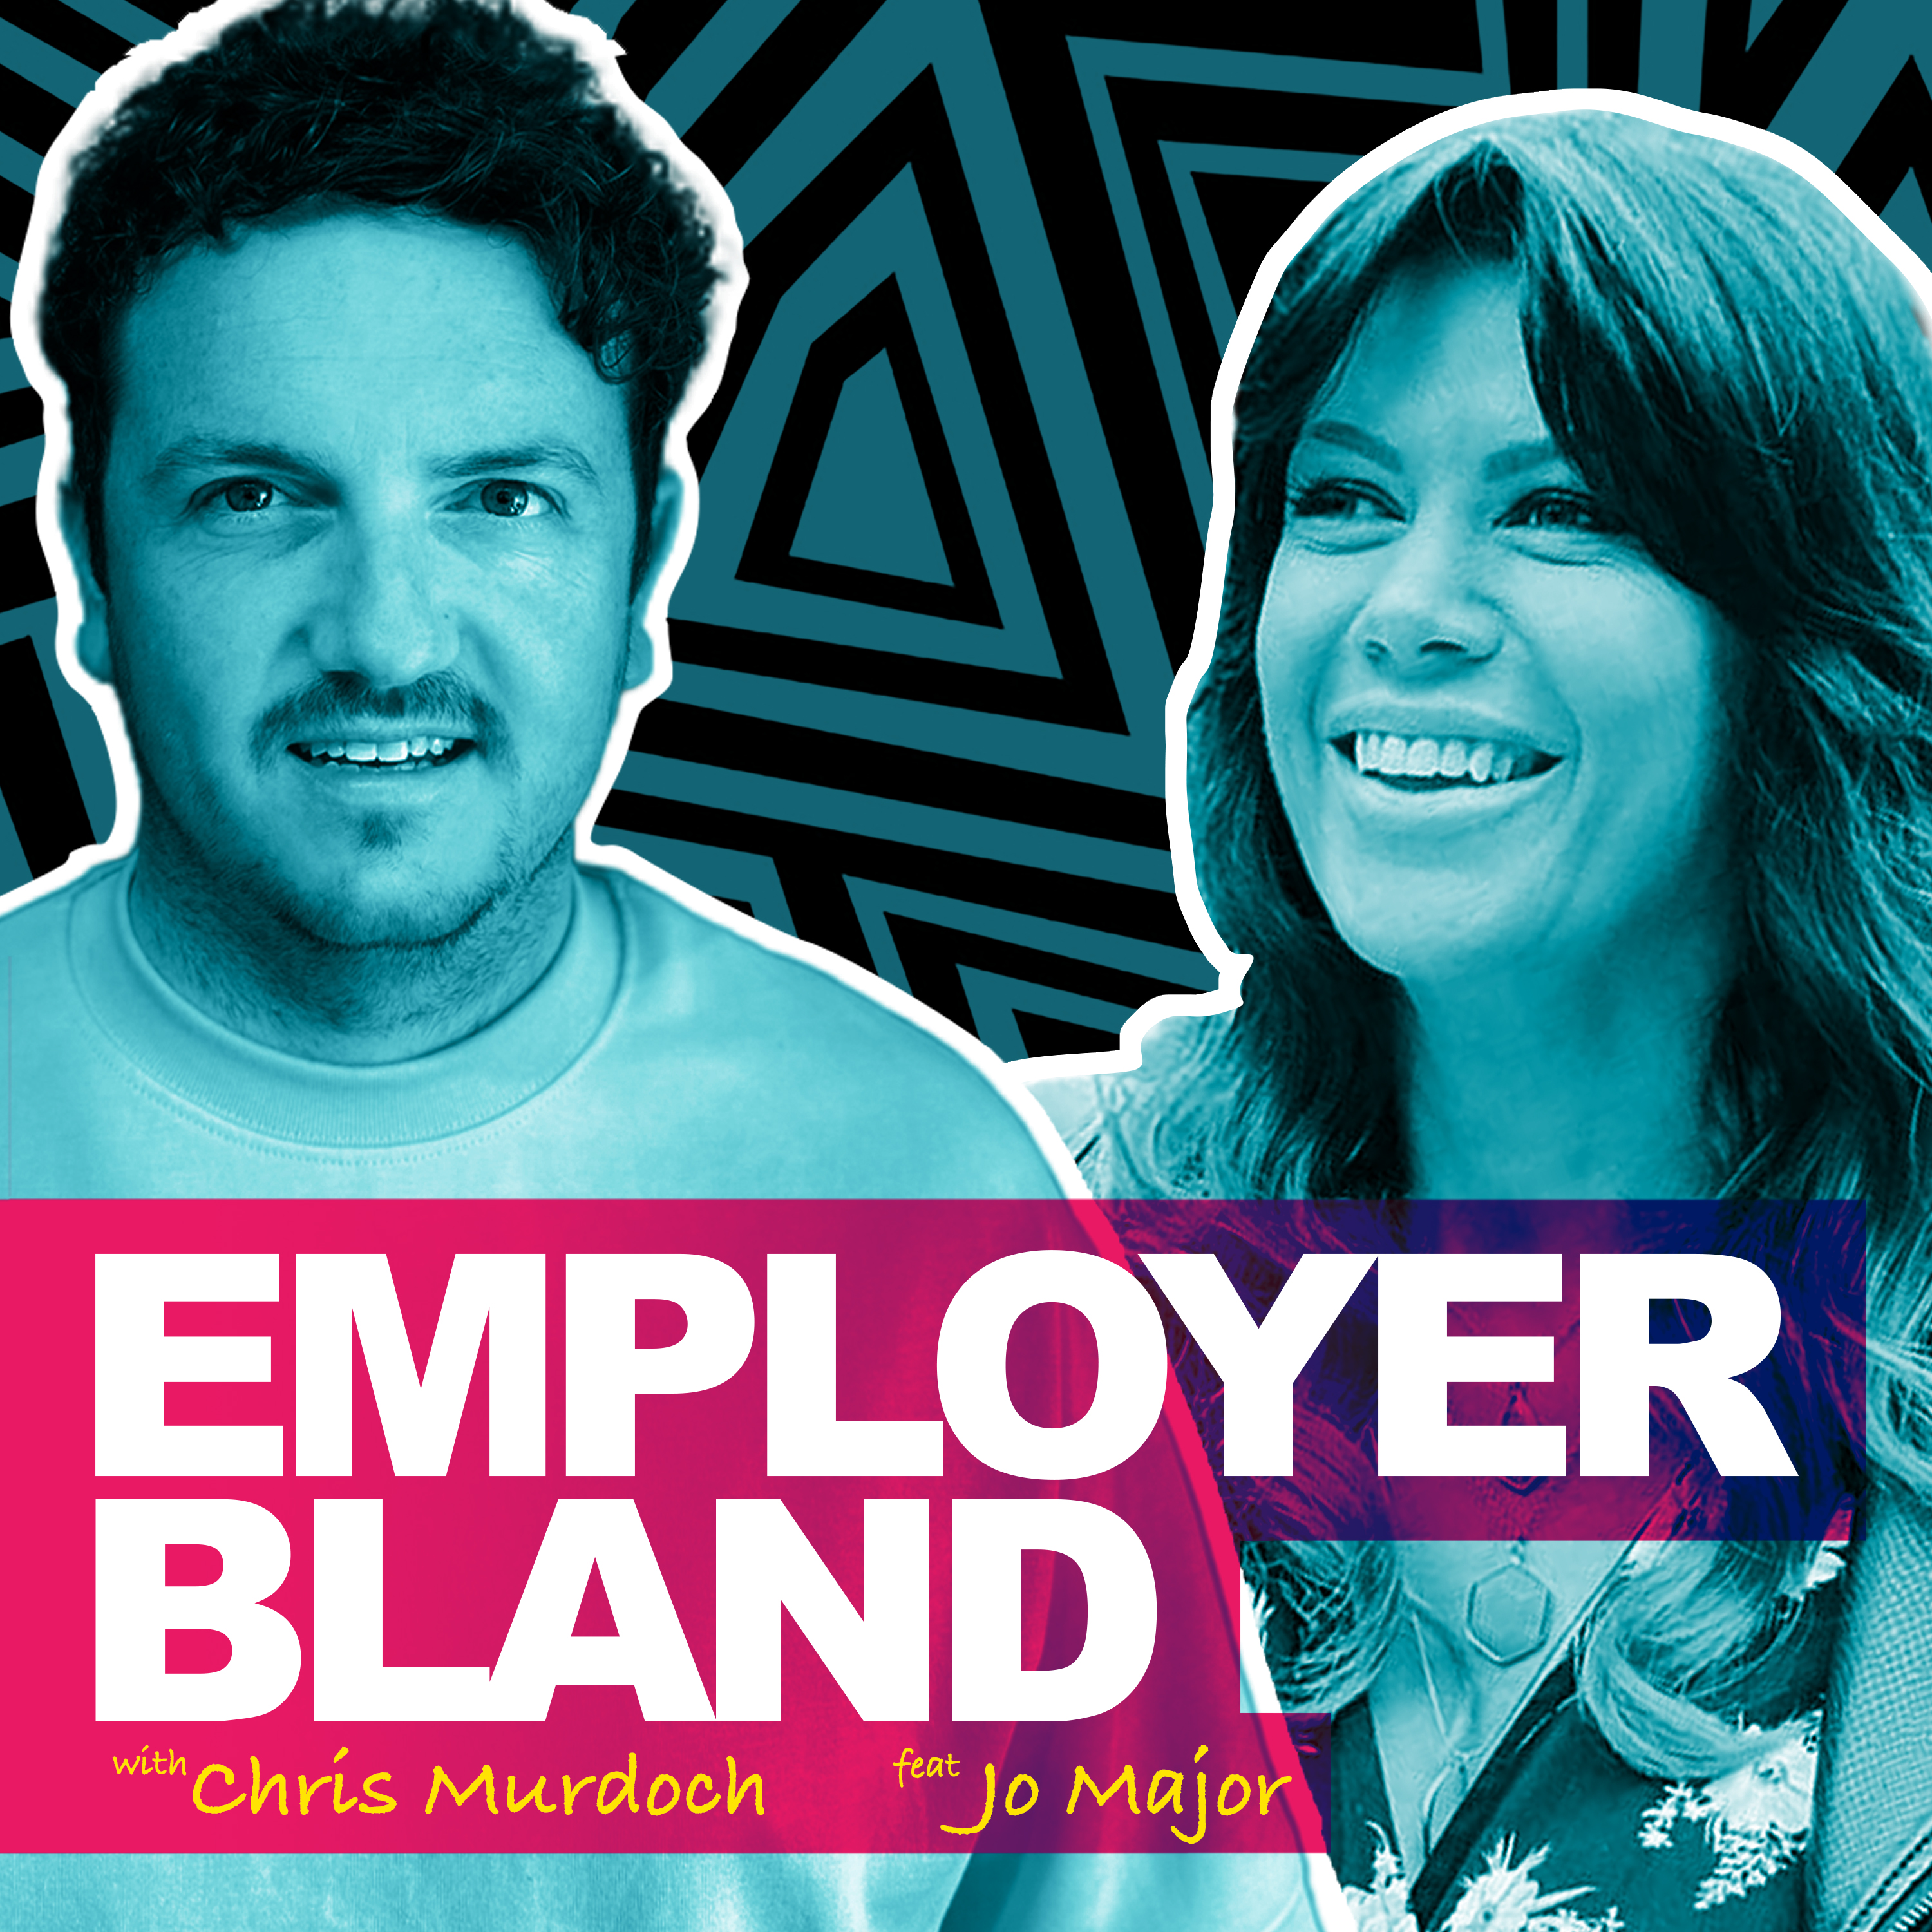 The relationship Equity, Inclusion and belonging has with Employer Brand.